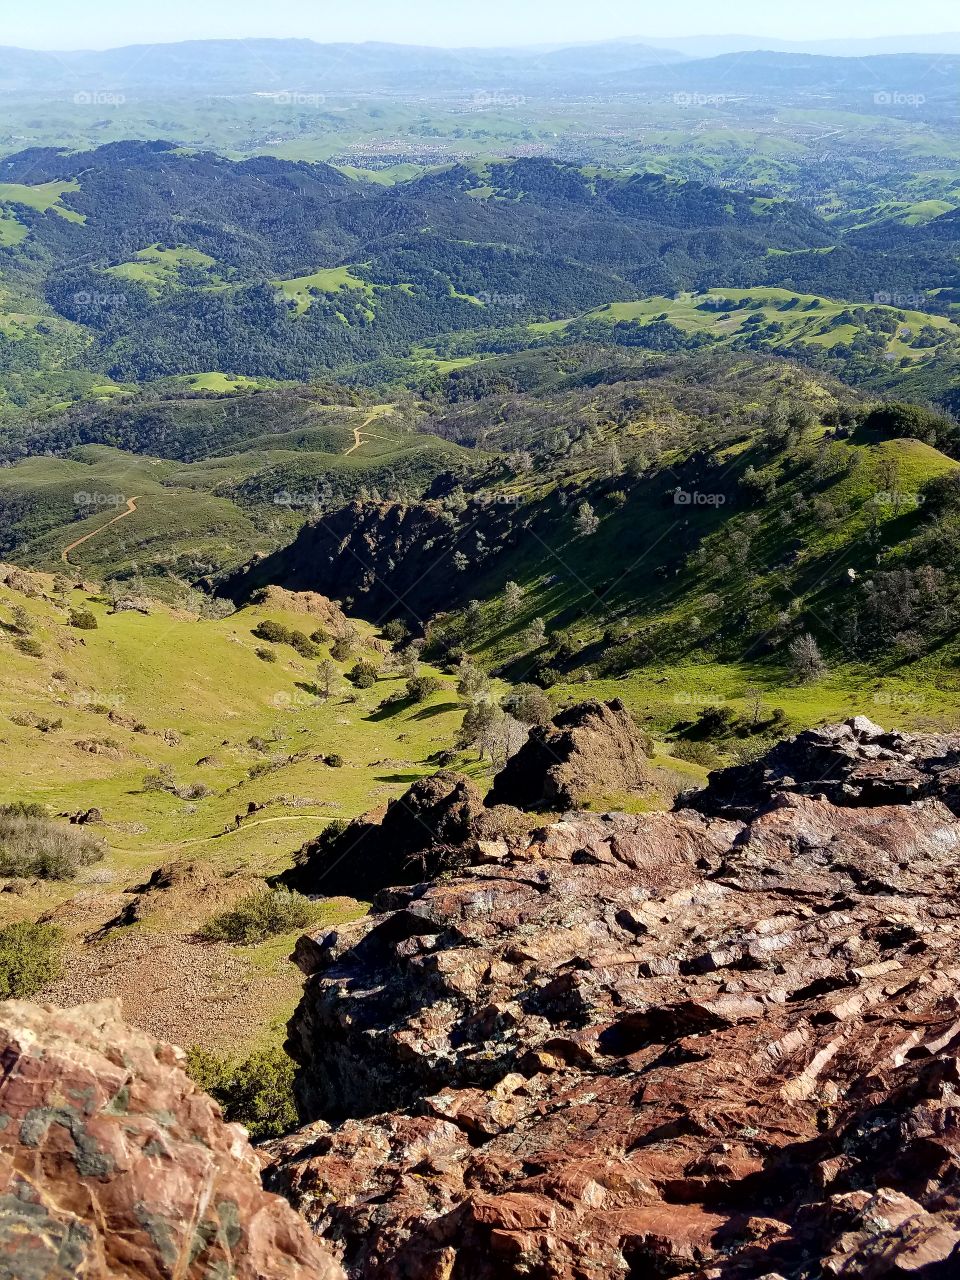 View from the top of Mt. Diablo in the Bay Area.